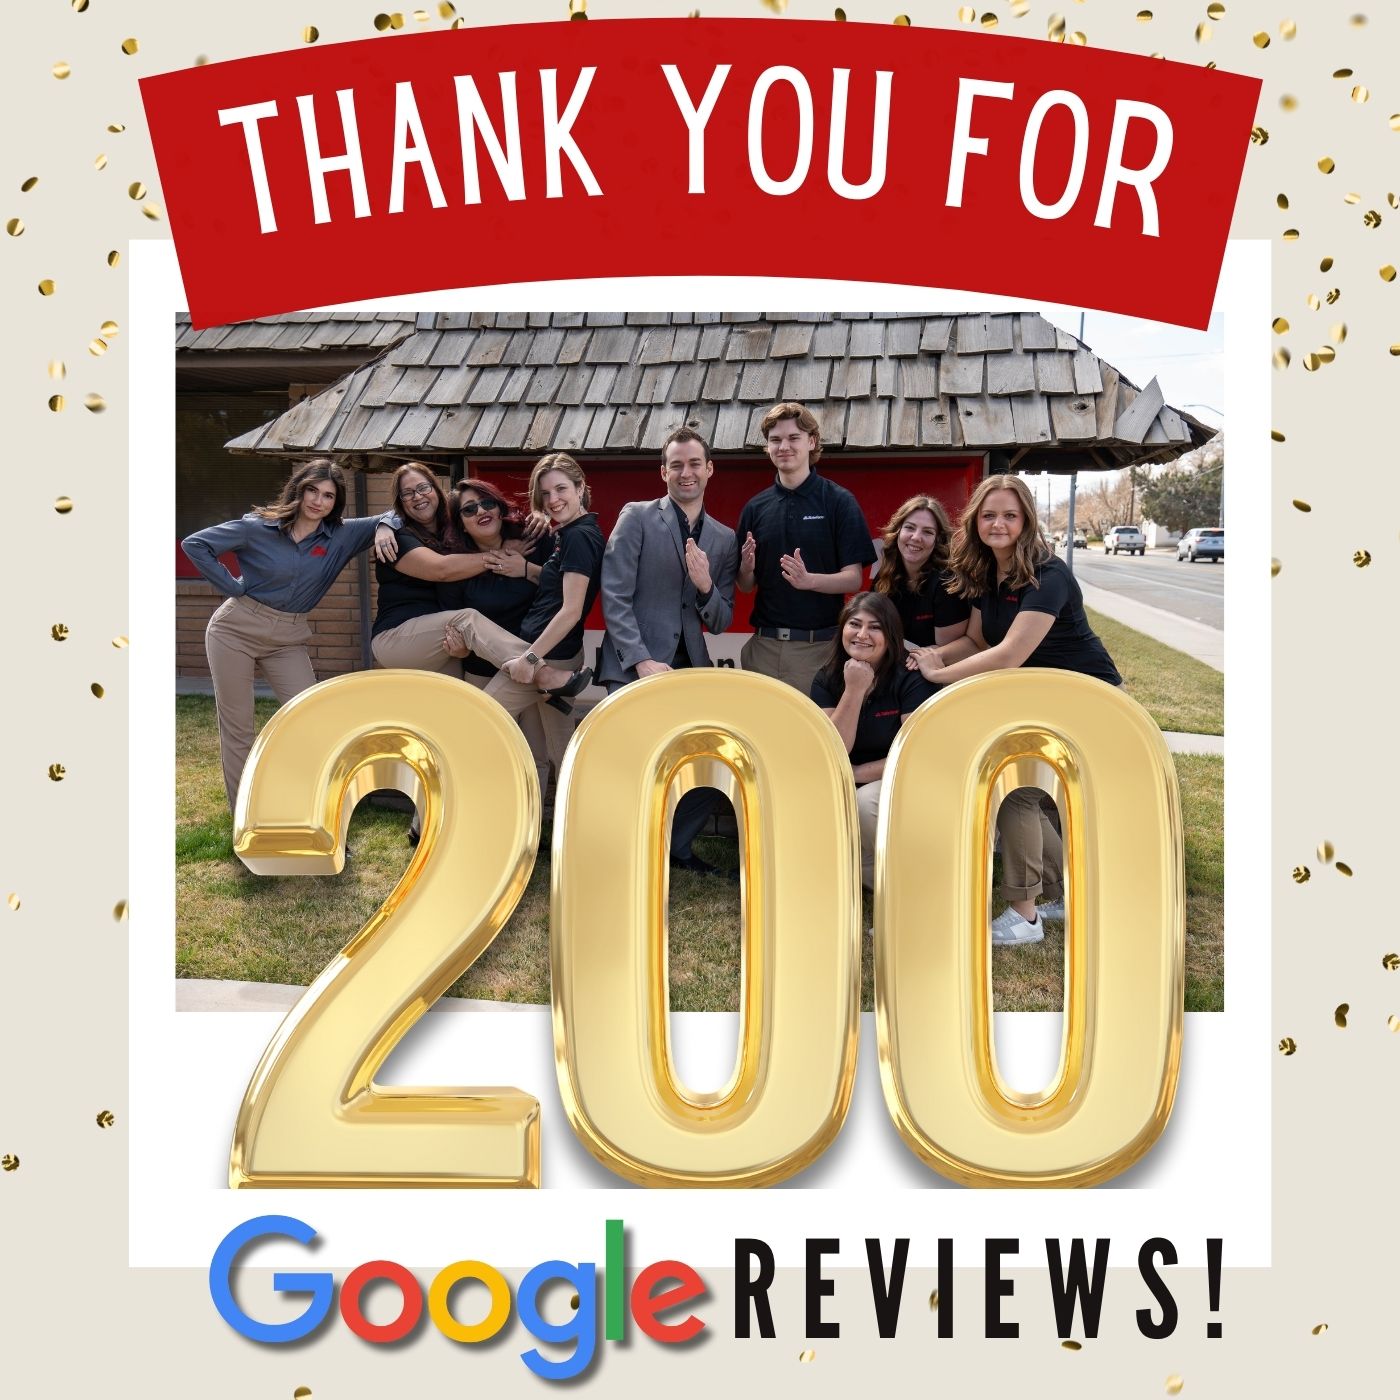 THANK YOU to our amazing customers for 200 Google Reviews!